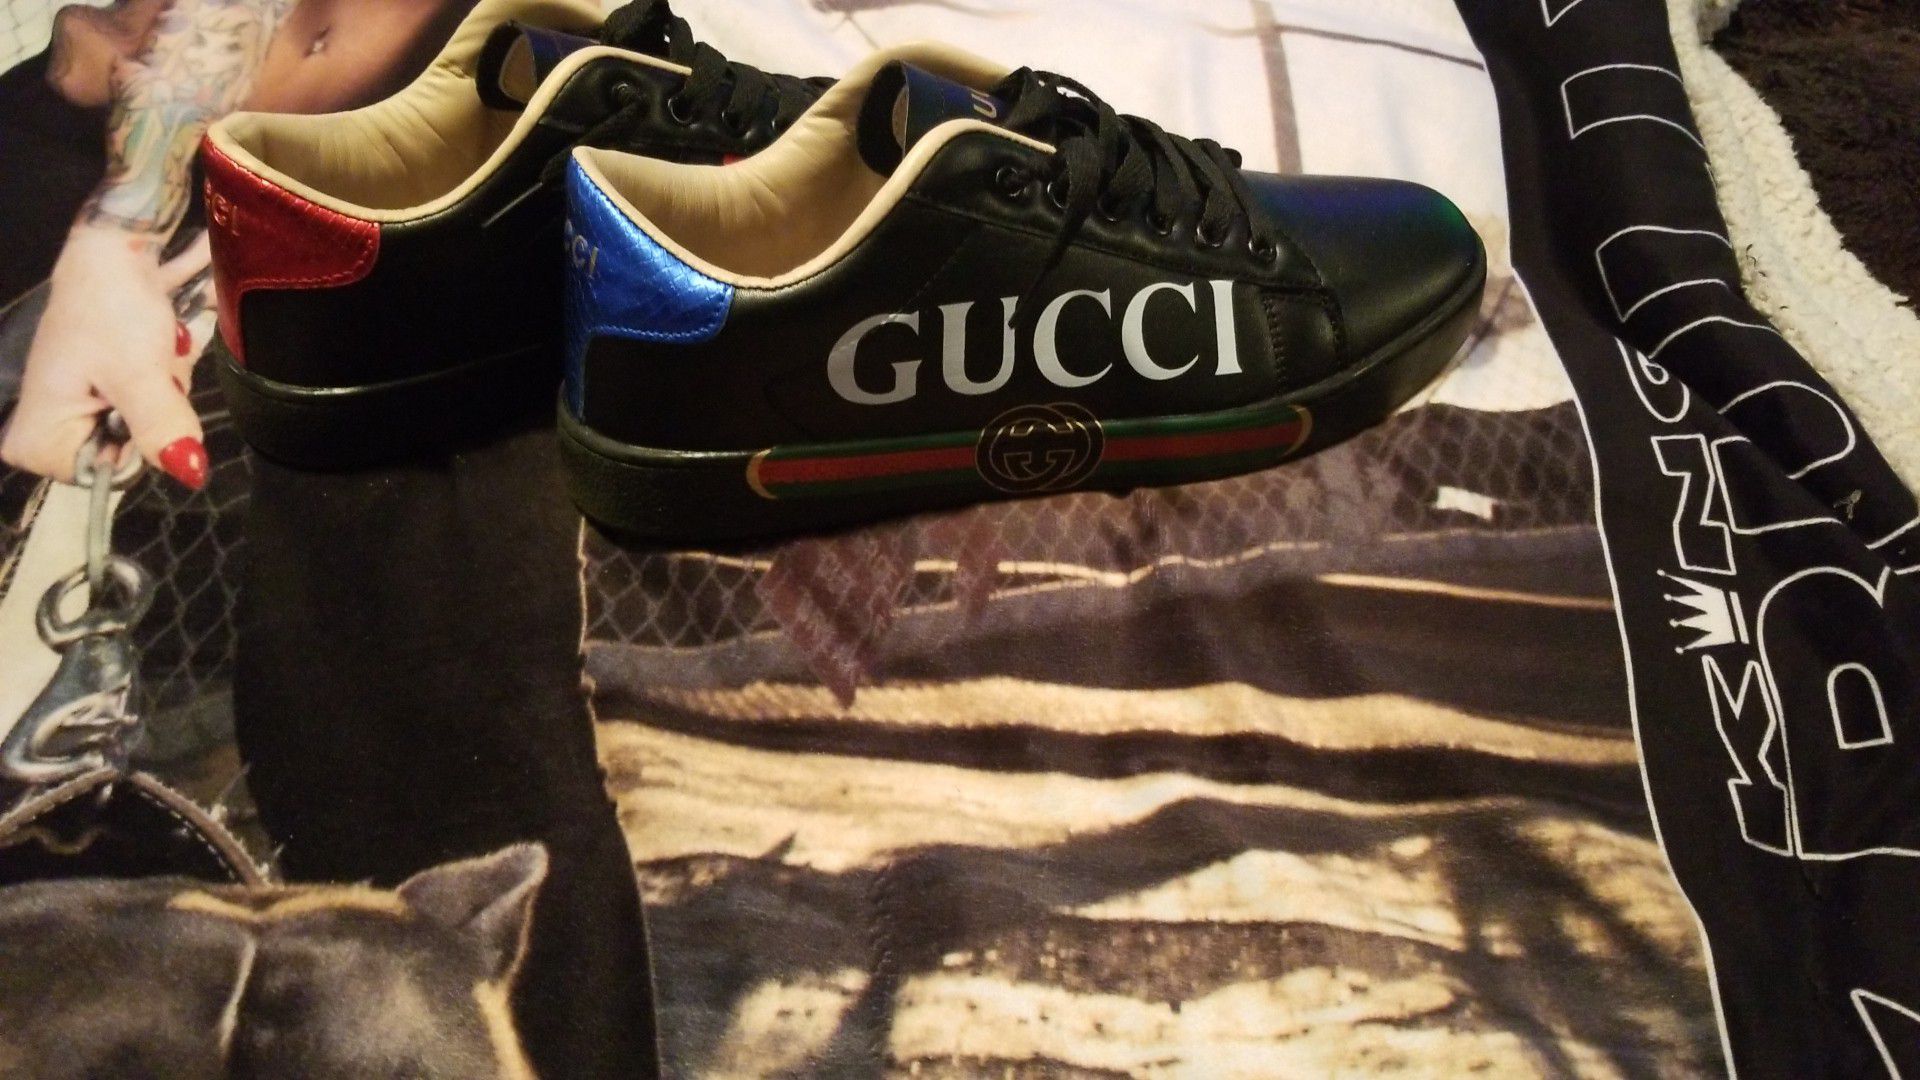 gucci shoes with free Gucci socks